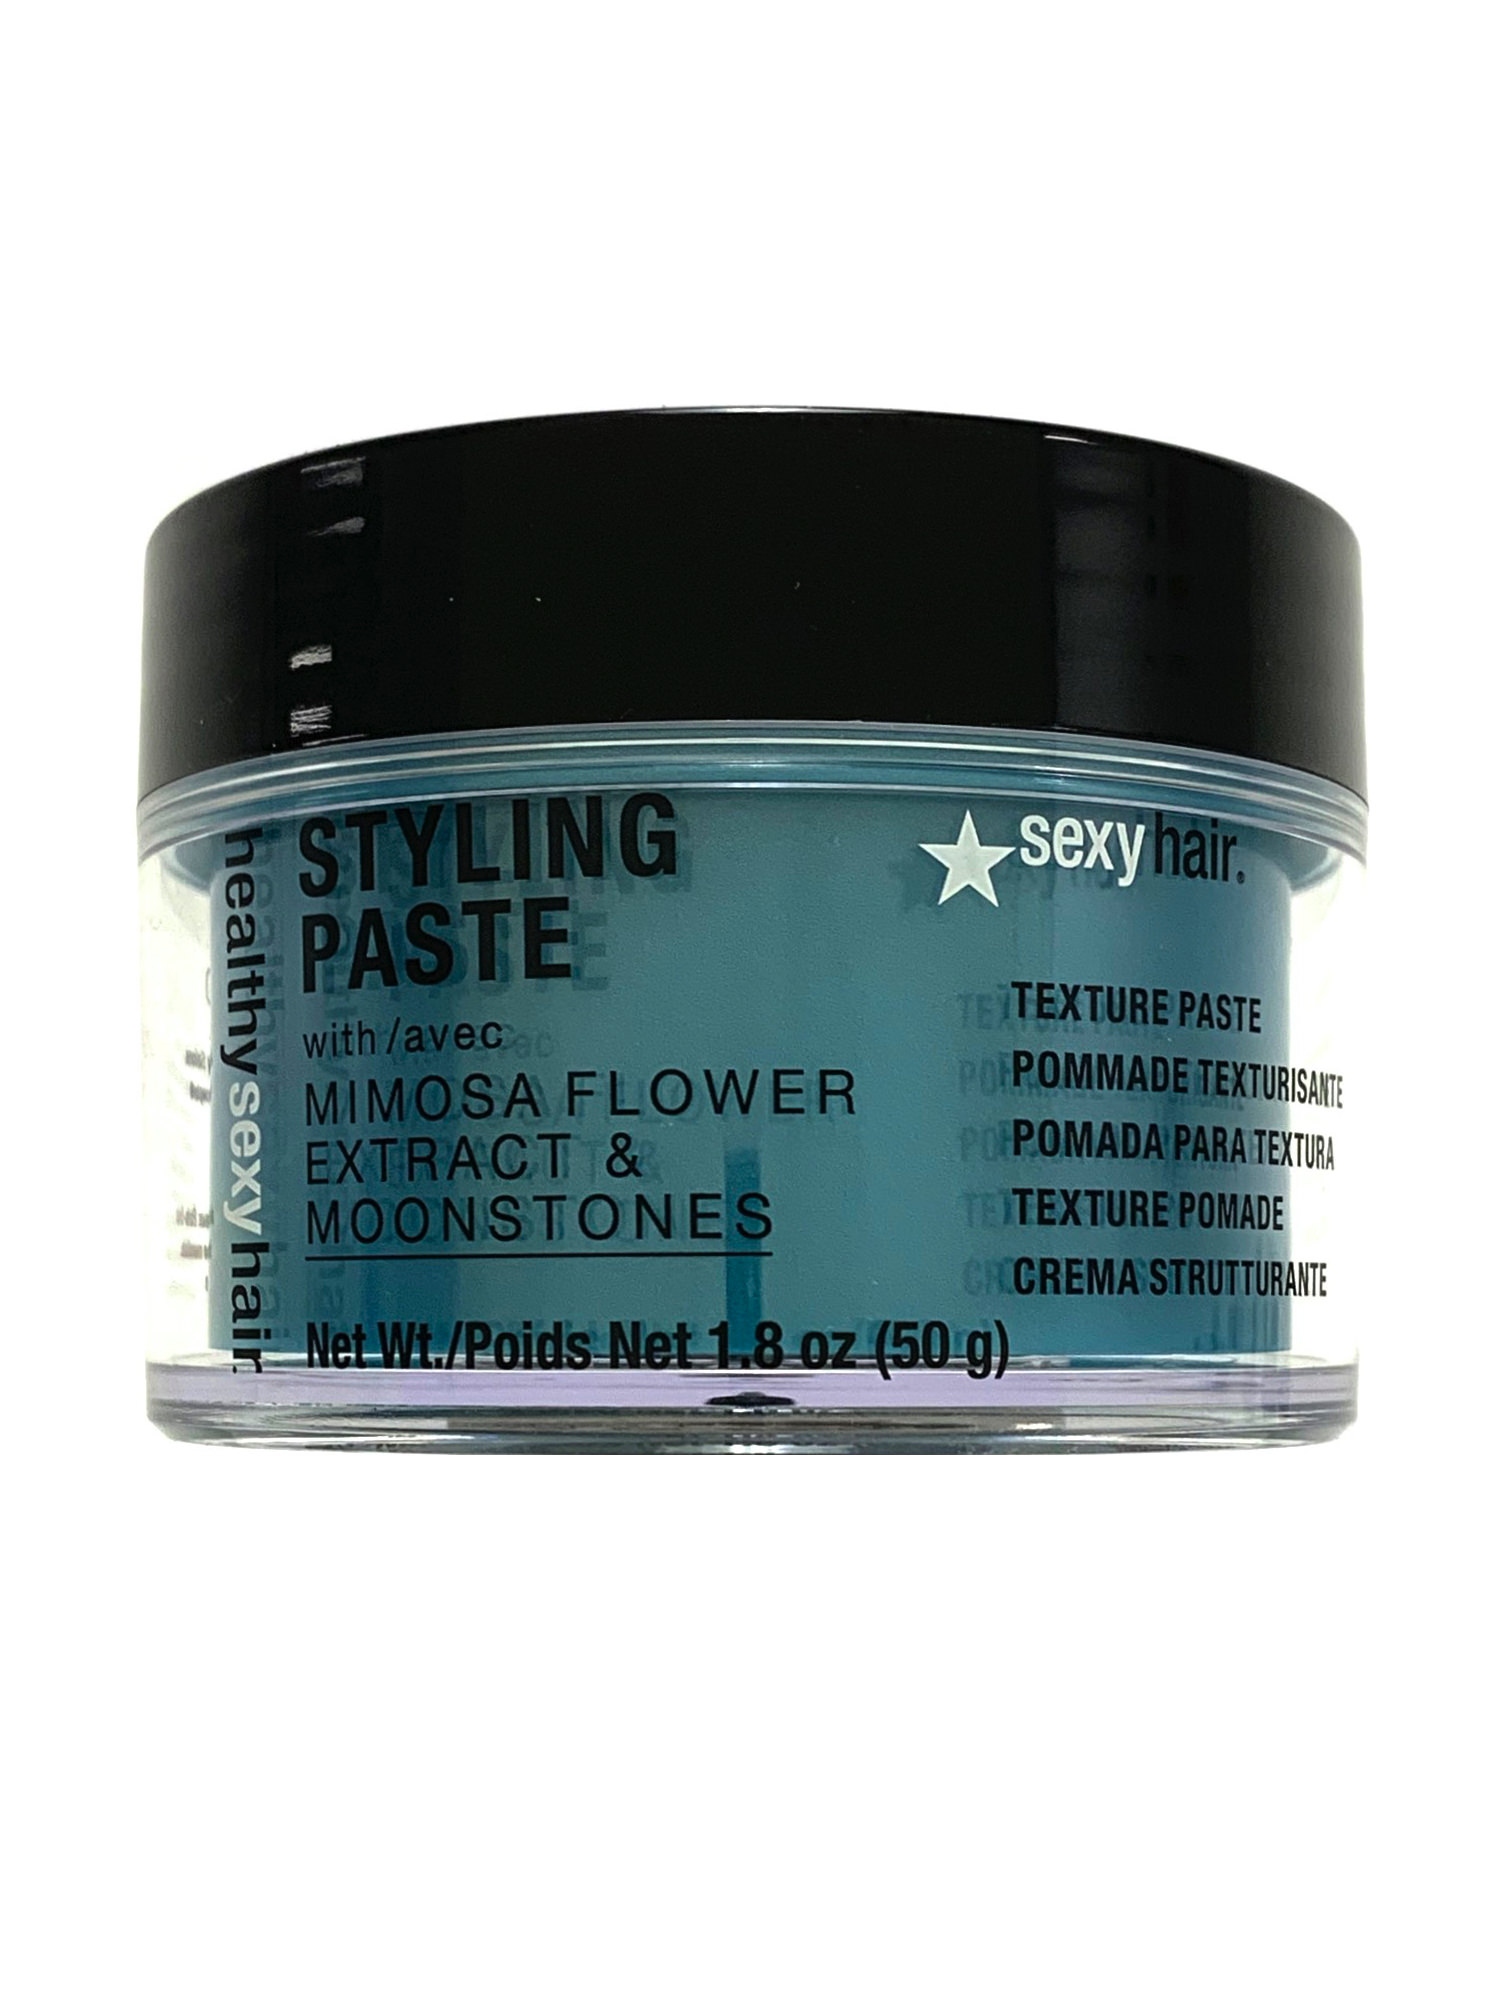 Sexy Hair Healthy Texturizing Hair Paste with Mimosa Flower Extract & Moon Stones, 1.8 oz - Travel Size - image 1 of 3